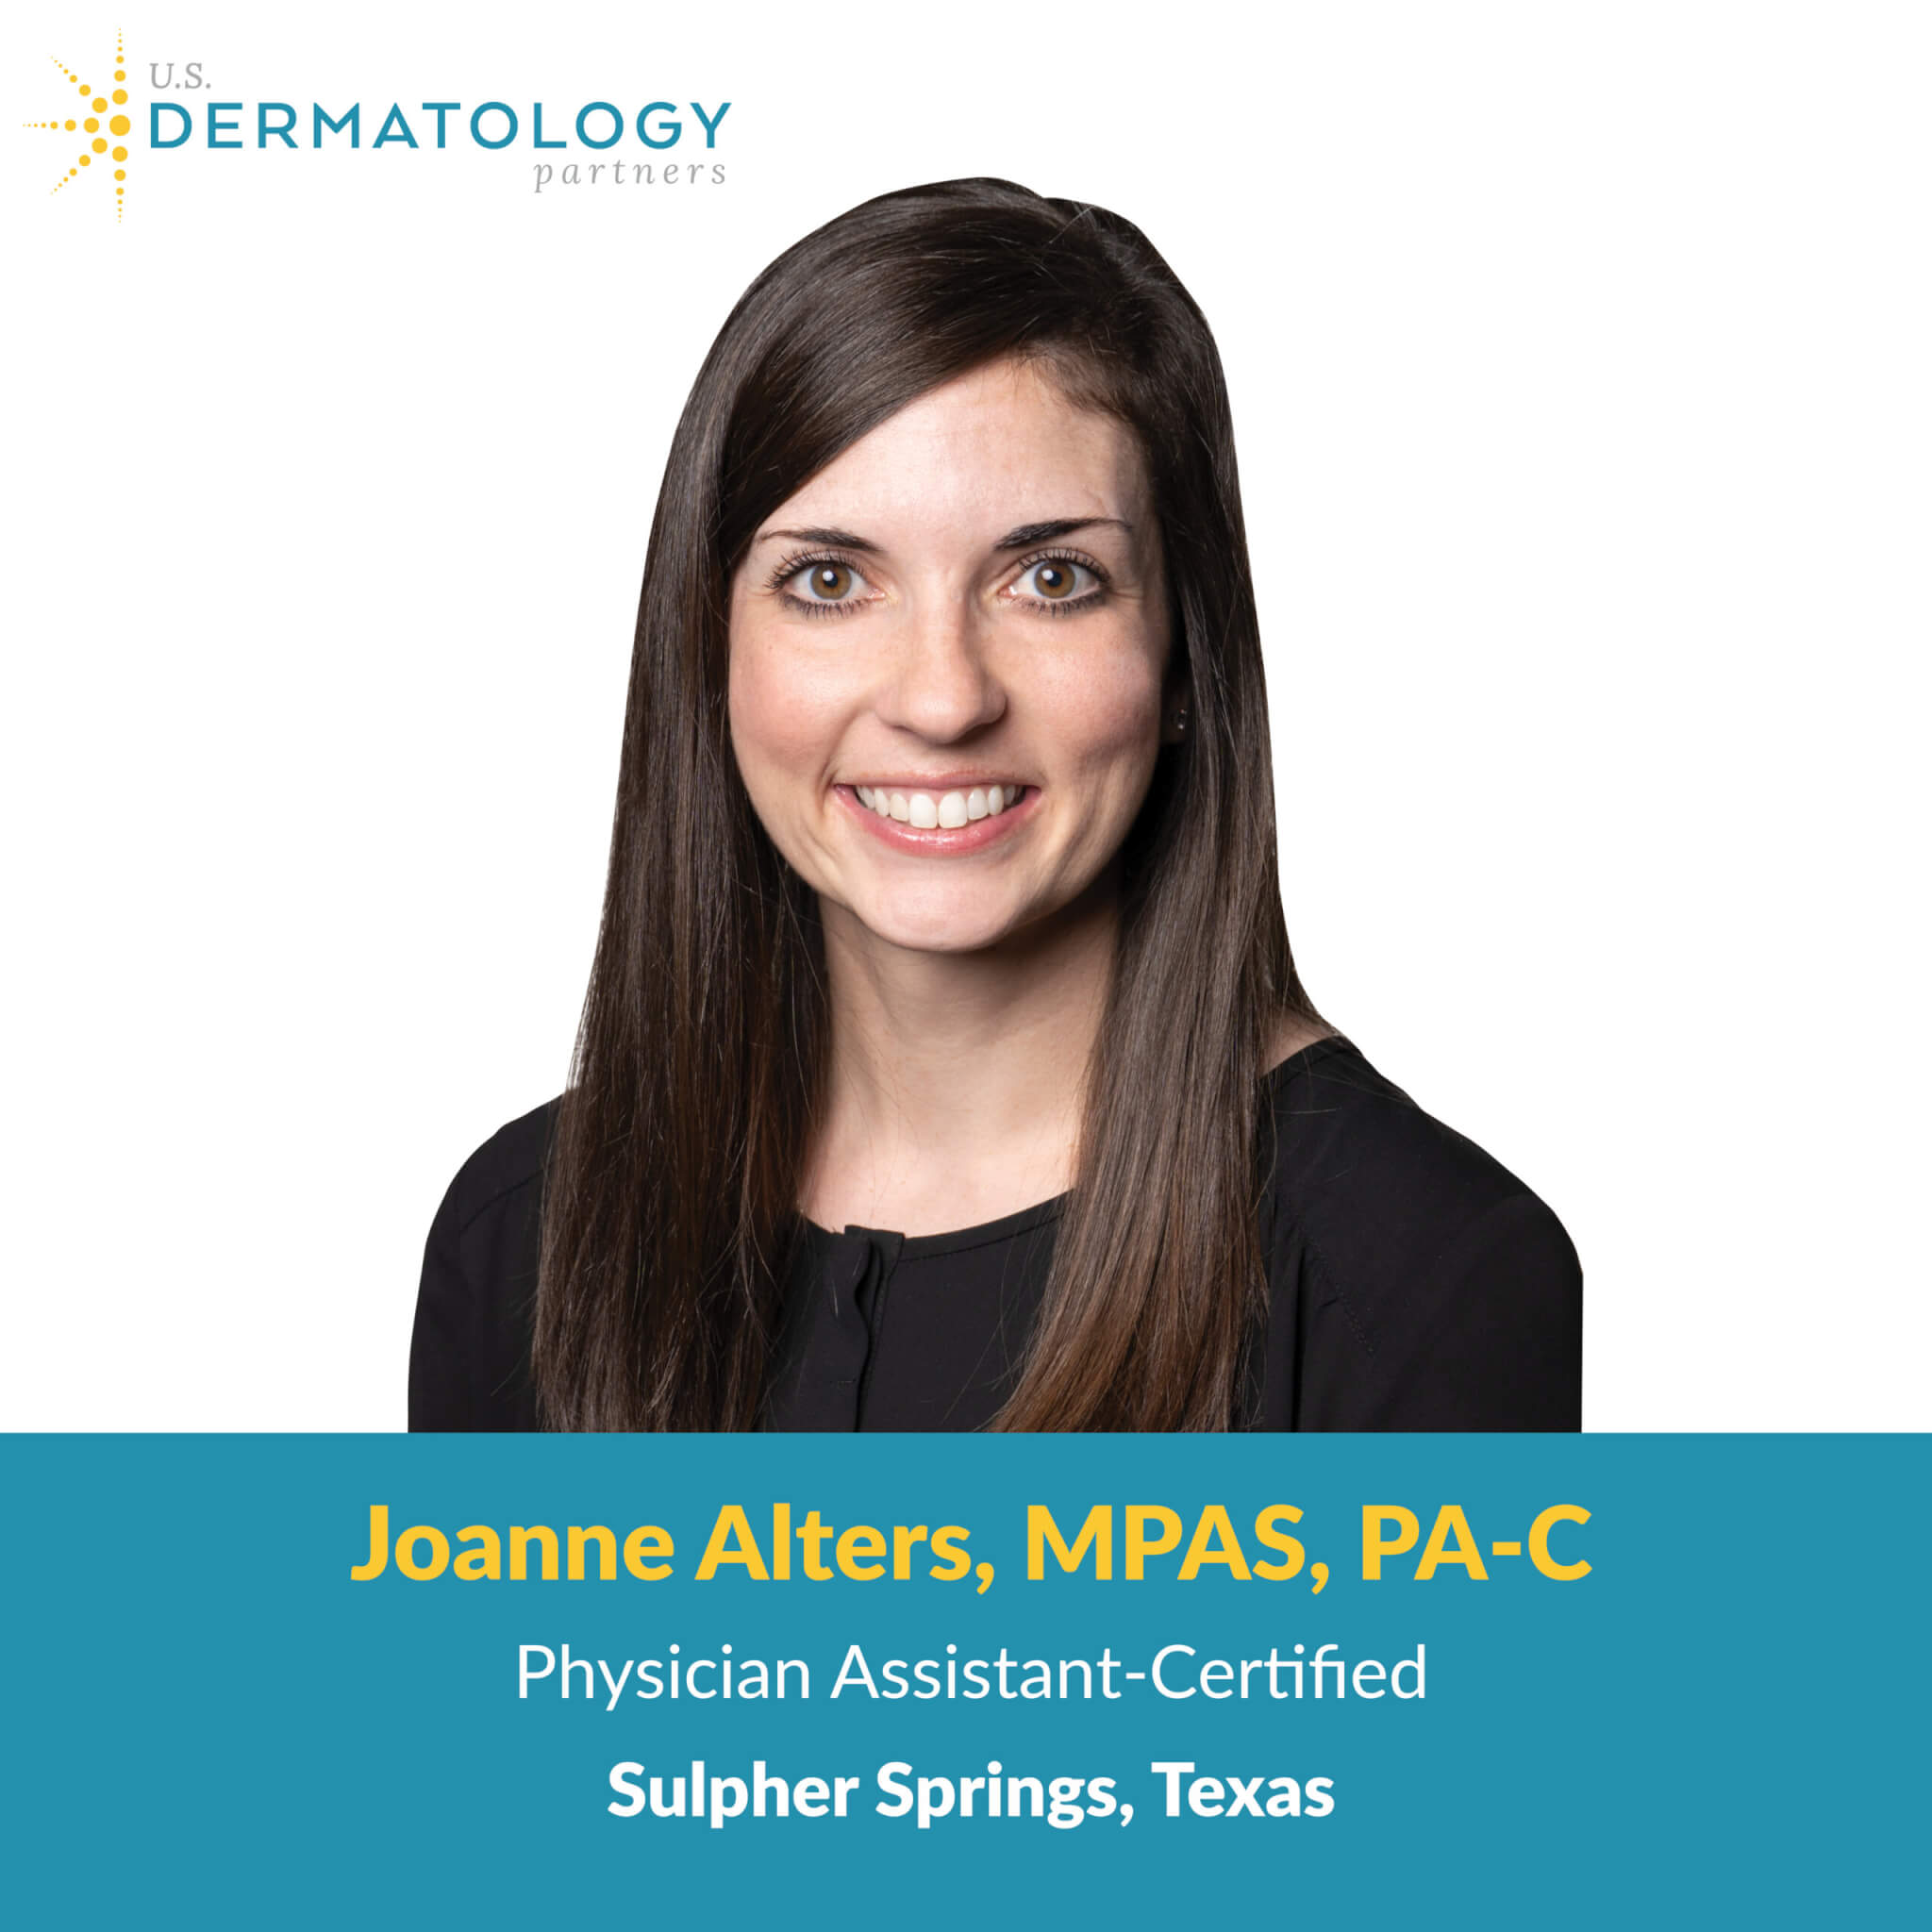 Joanne Alters is a Certified Physician Assistant in Greenville and Sulphur Springs, Texas. Request an appointment today.